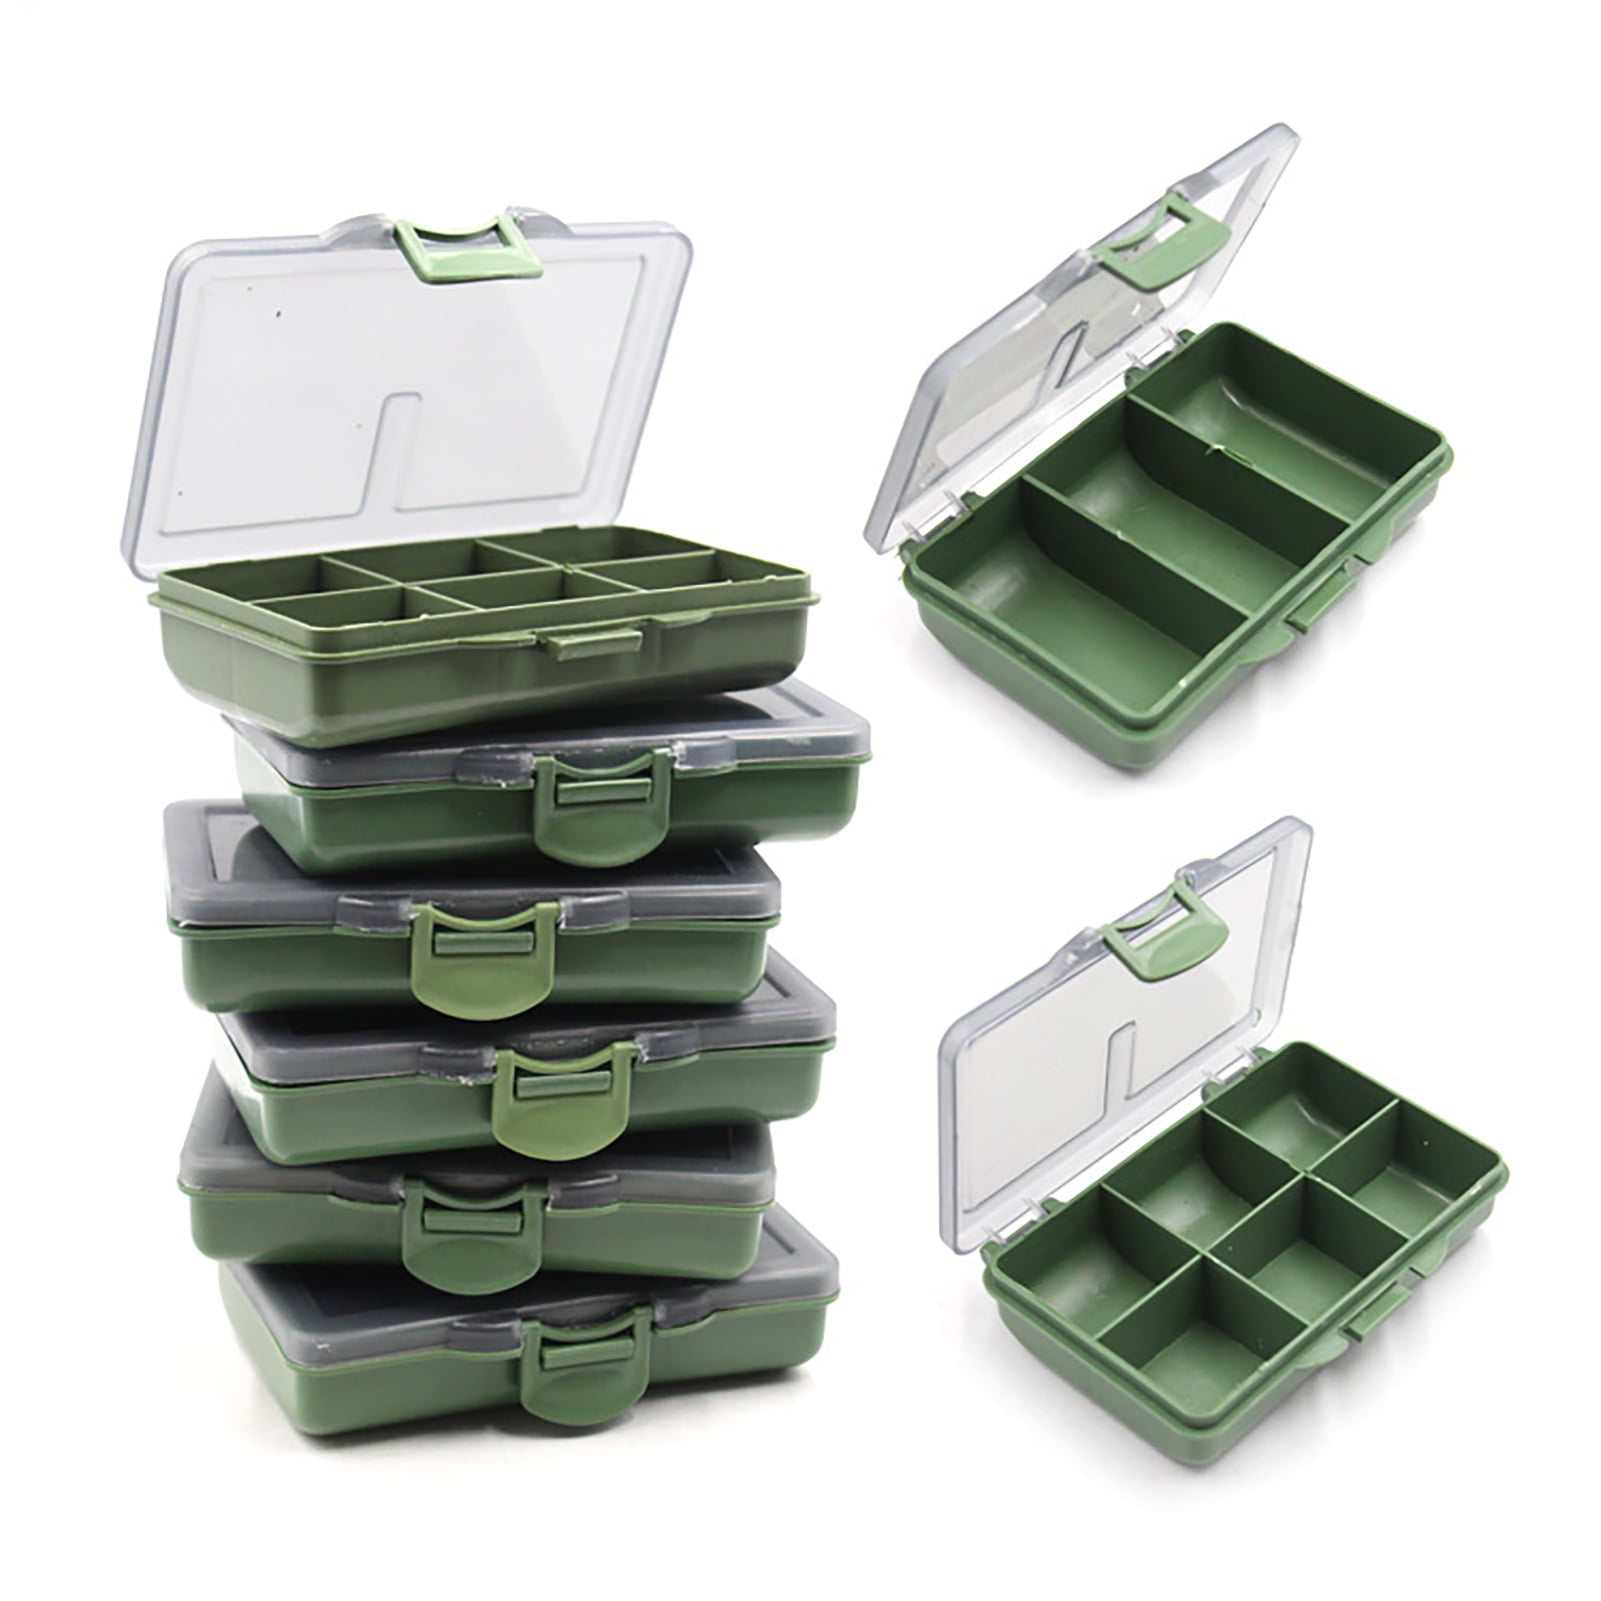 Details about   Waterproof Fishing Lure Box 30 Compartments Tackle Spoon Hook Bait Storage Case 